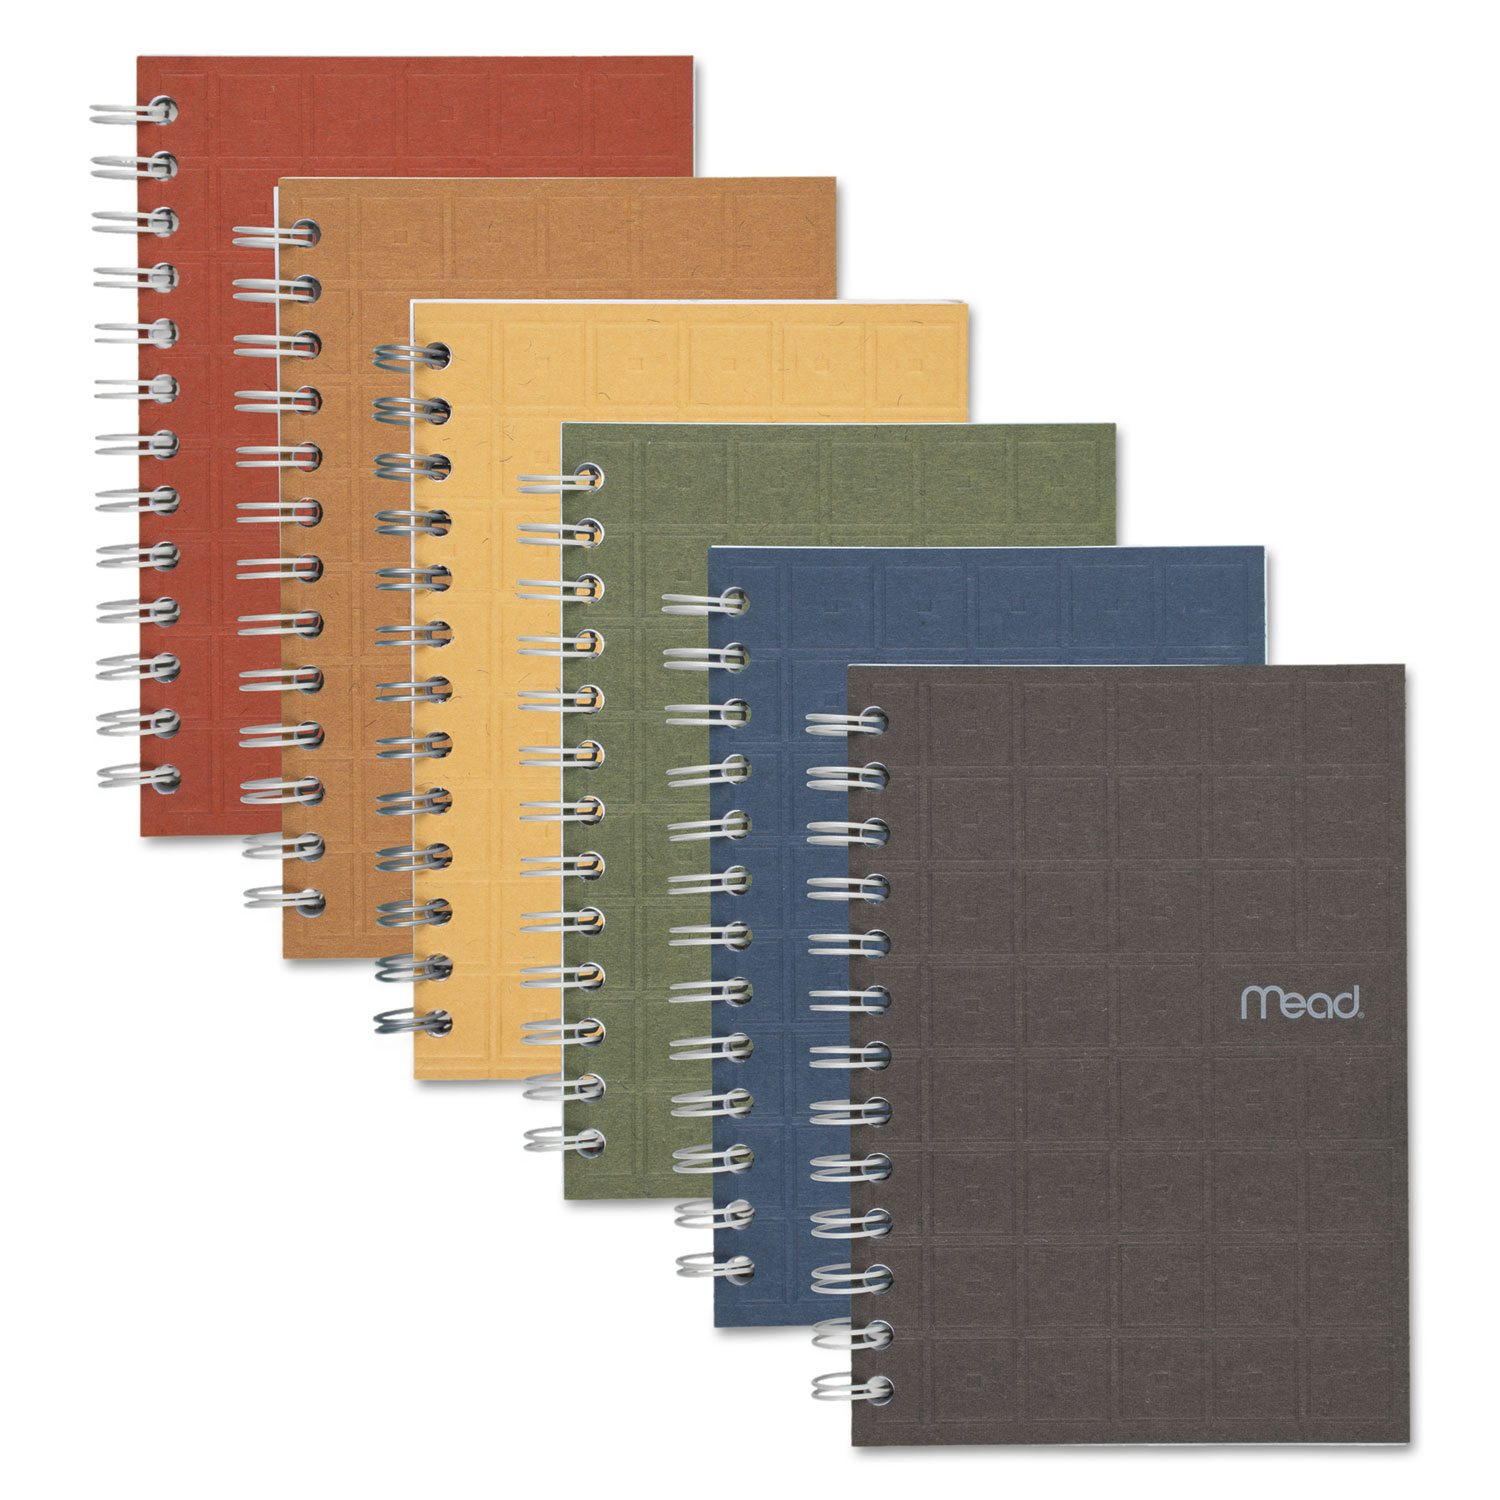  Mead 45186 Recycled Notebook, 1 Subject, Medium/College Rule, Assorted Color Covers, 7 x 5, 80 Sheets (MEA45186) 